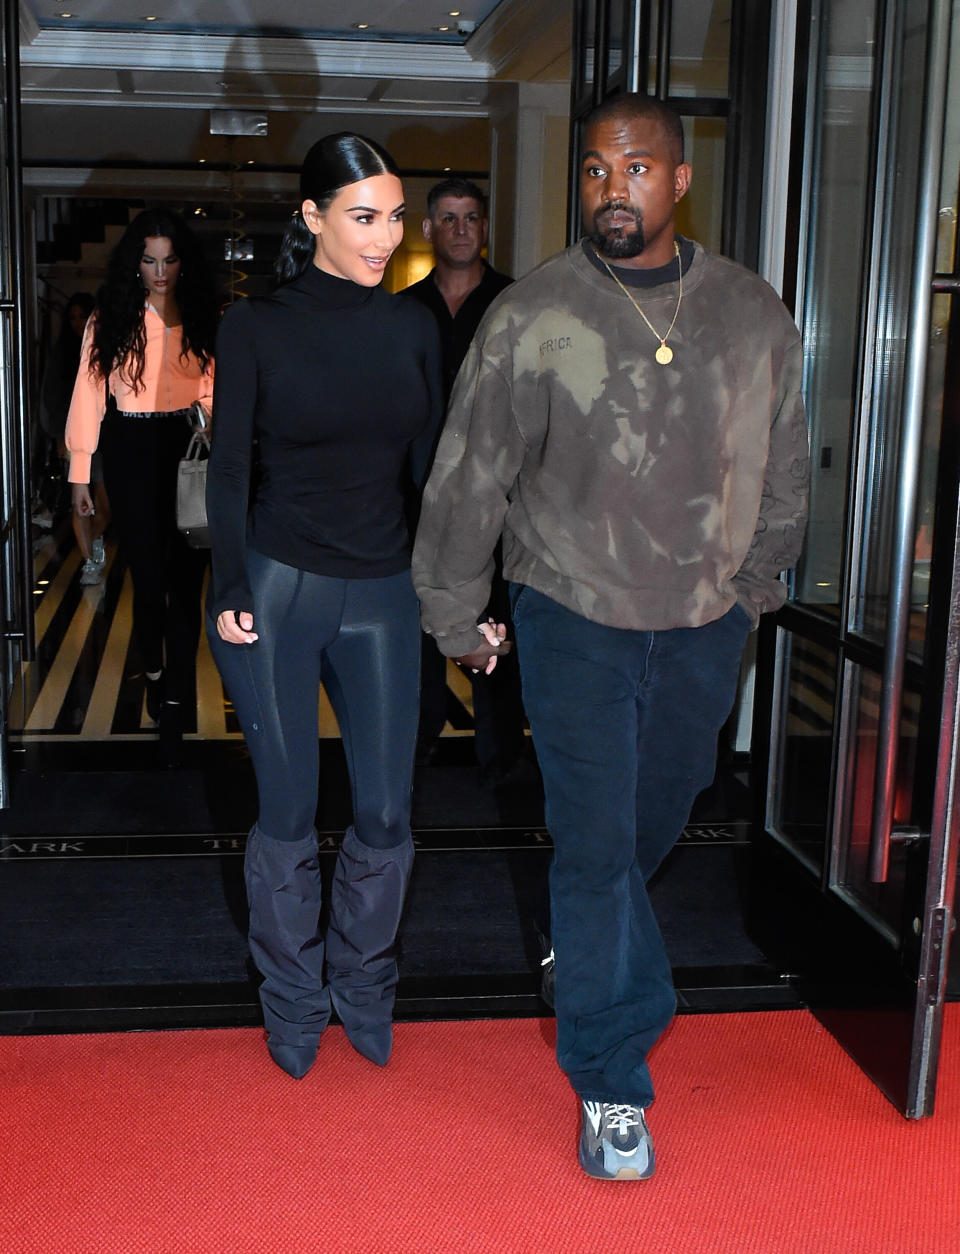 NEW YORK, NY - MAY 07:  Kanye West and Kim Kardashian  are seen outside the mark hotel  on May 7, 2019 in New York City.  (Photo by Raymond Hall/GC Images)